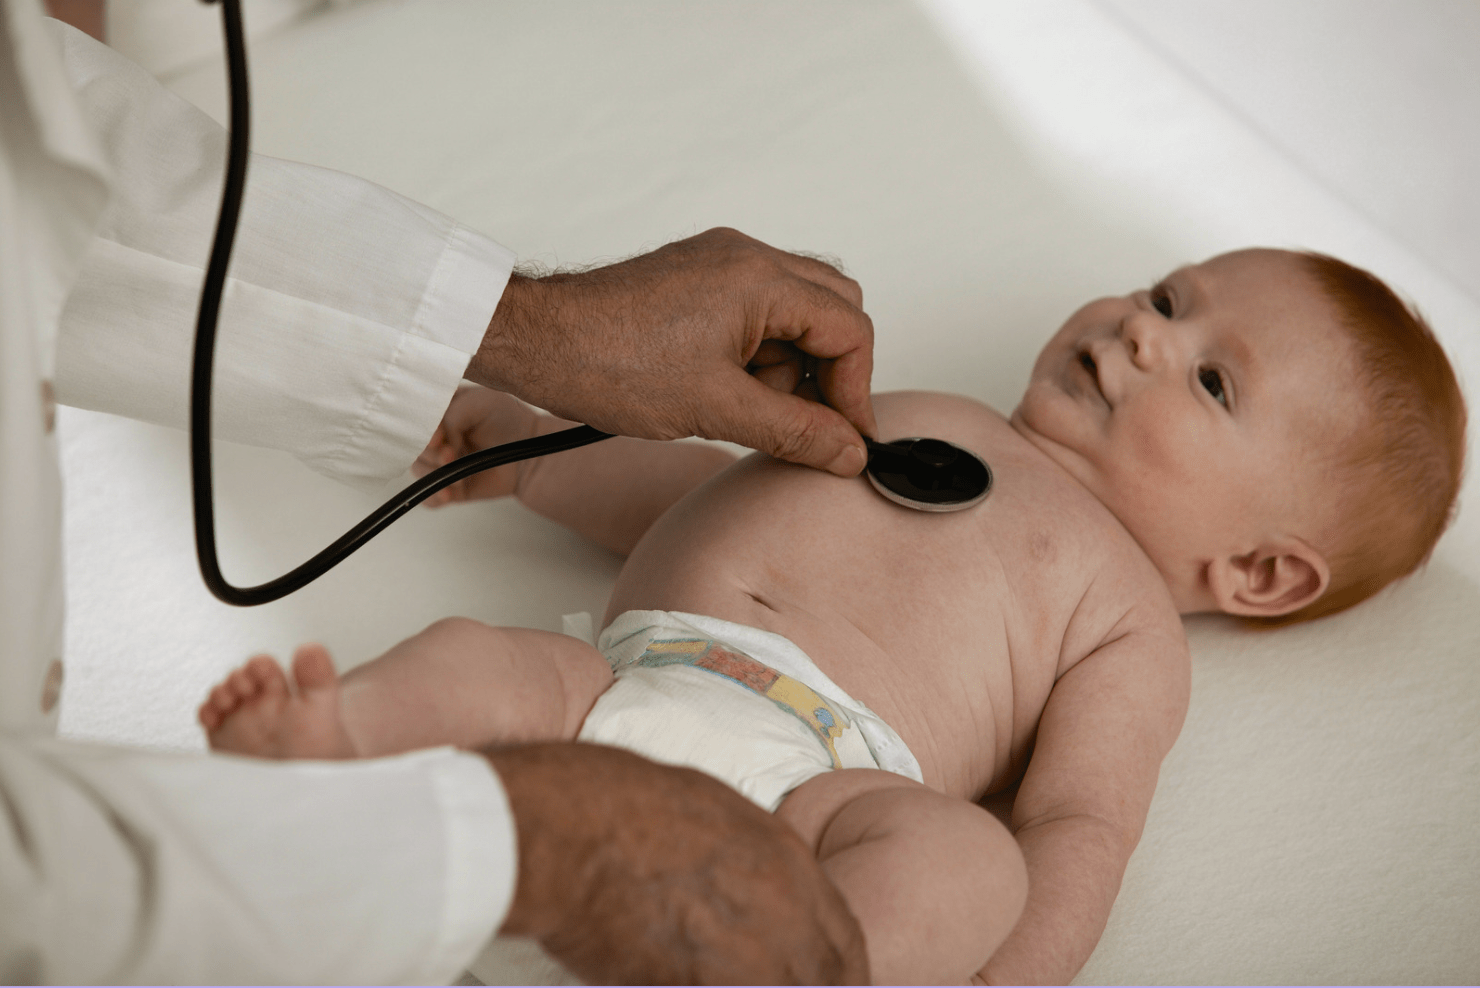 Newborn grunting and squirming examined by doctor